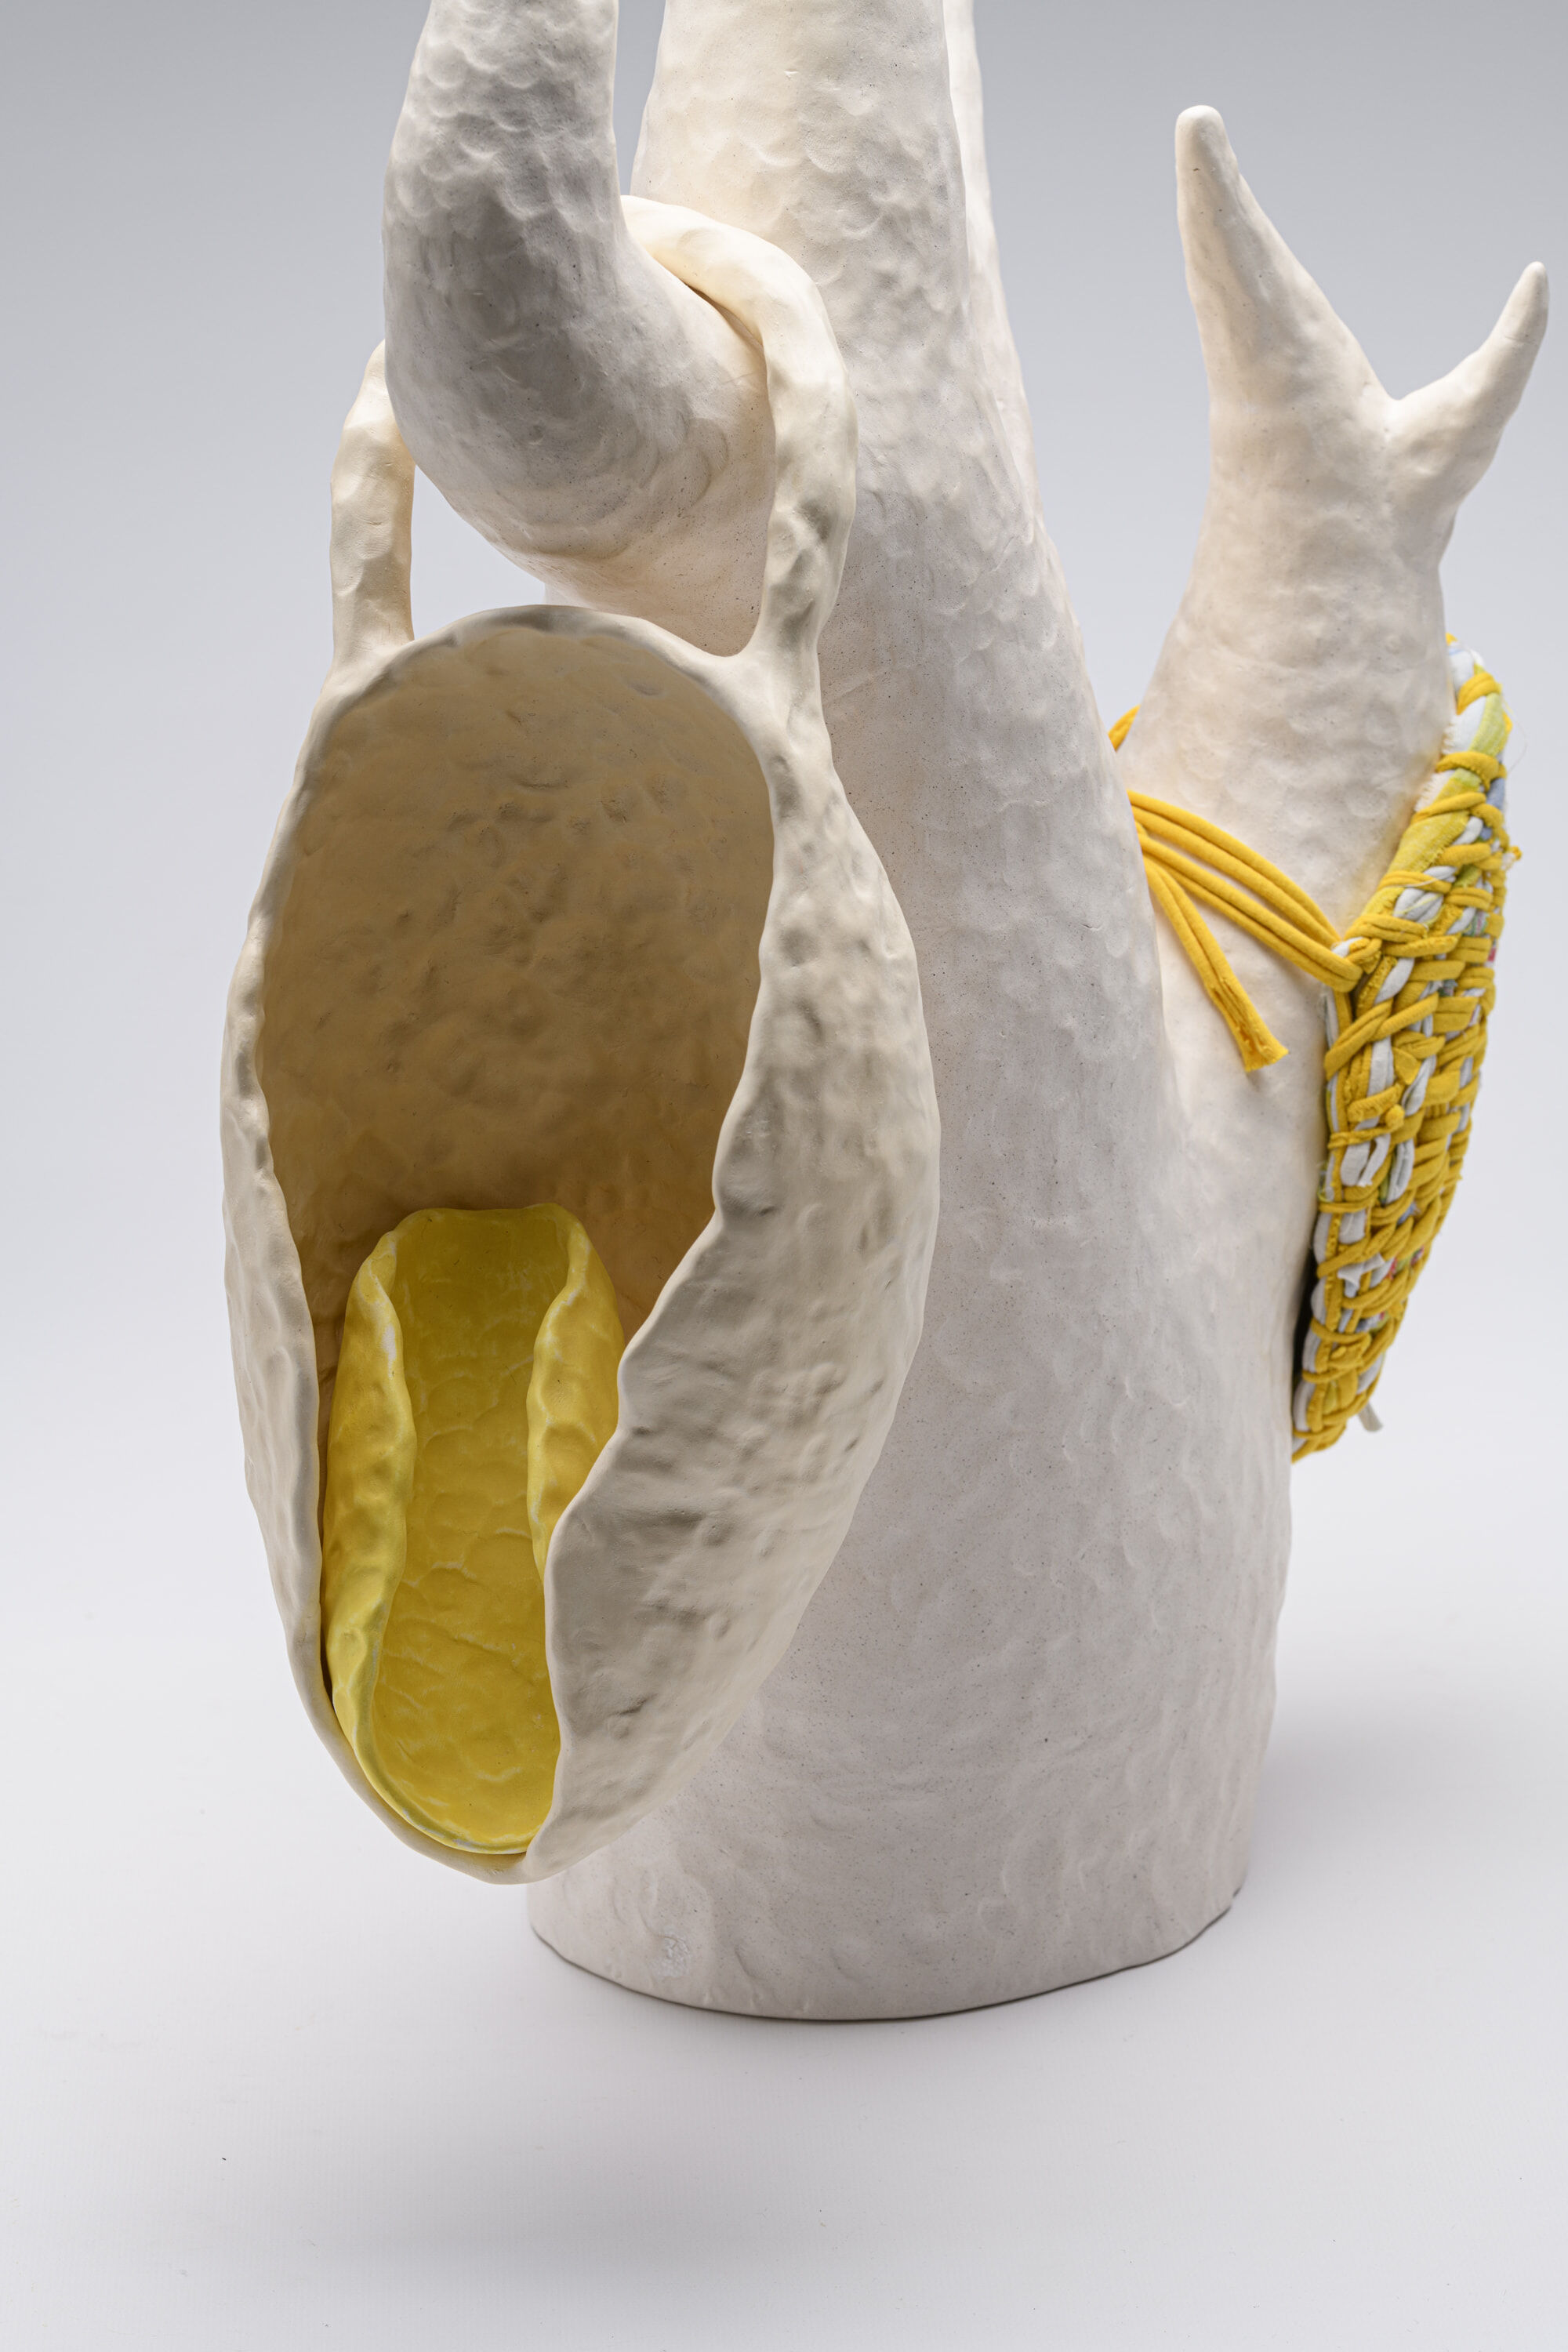 How to hold, how to carry, ceramic, texitle, weaving, robyn phelan